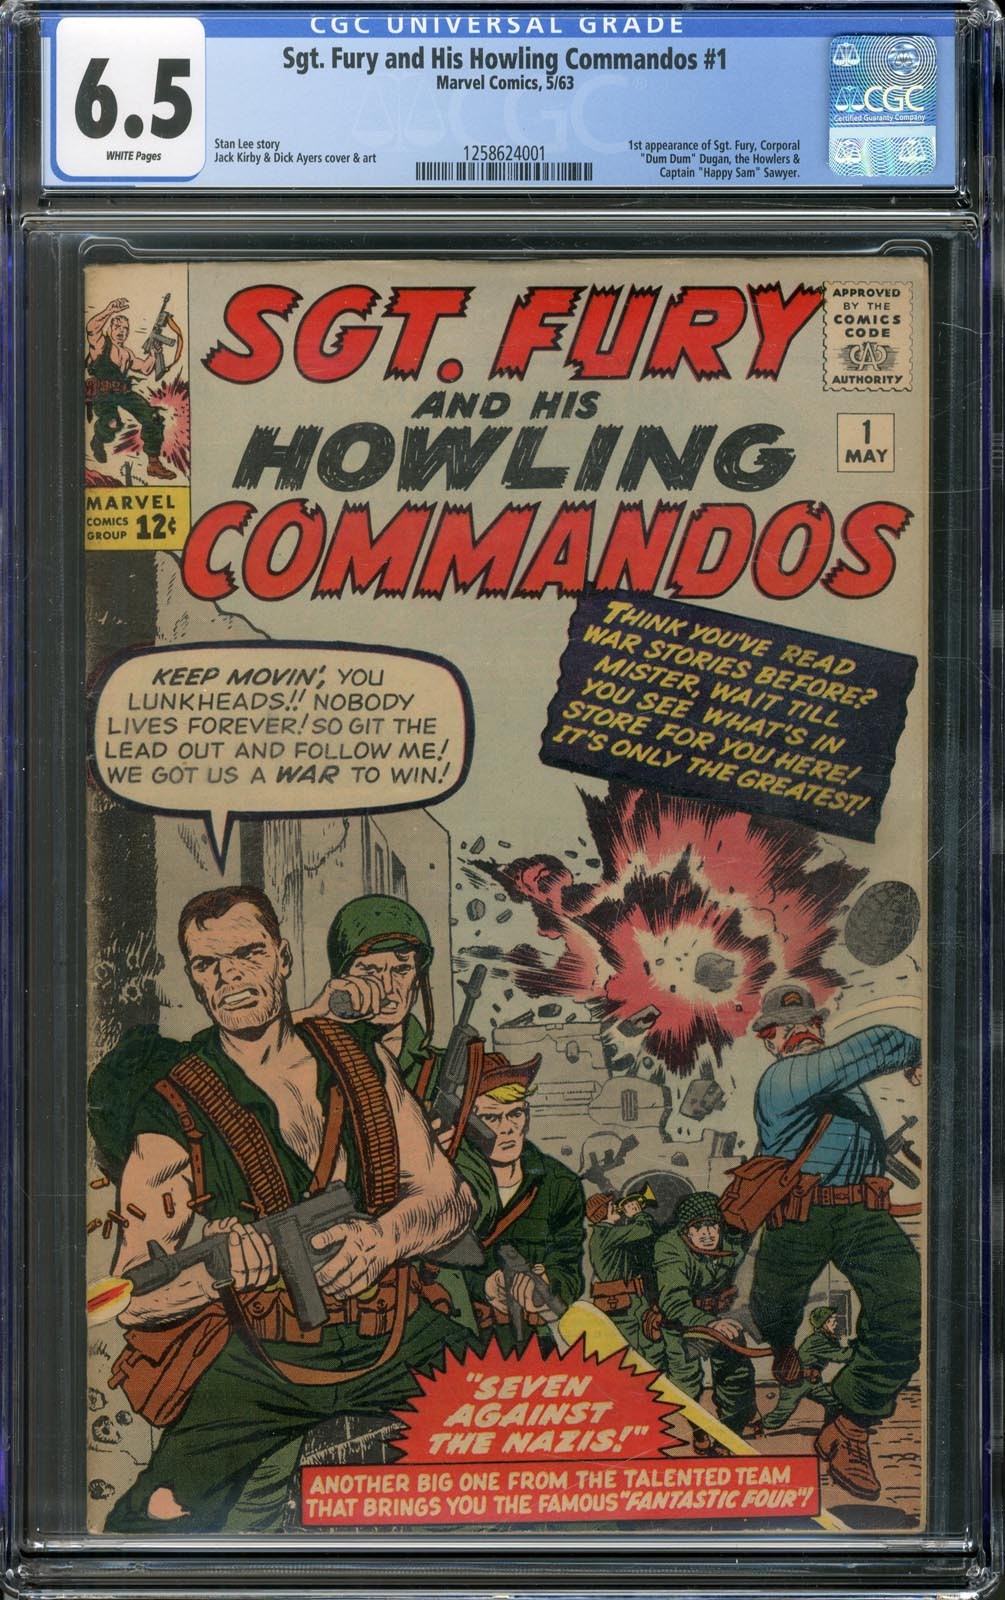 Rock And Pop Culture - 1963 Sgt. Fury and His Howling Commandos #1 (CGC 6.5)